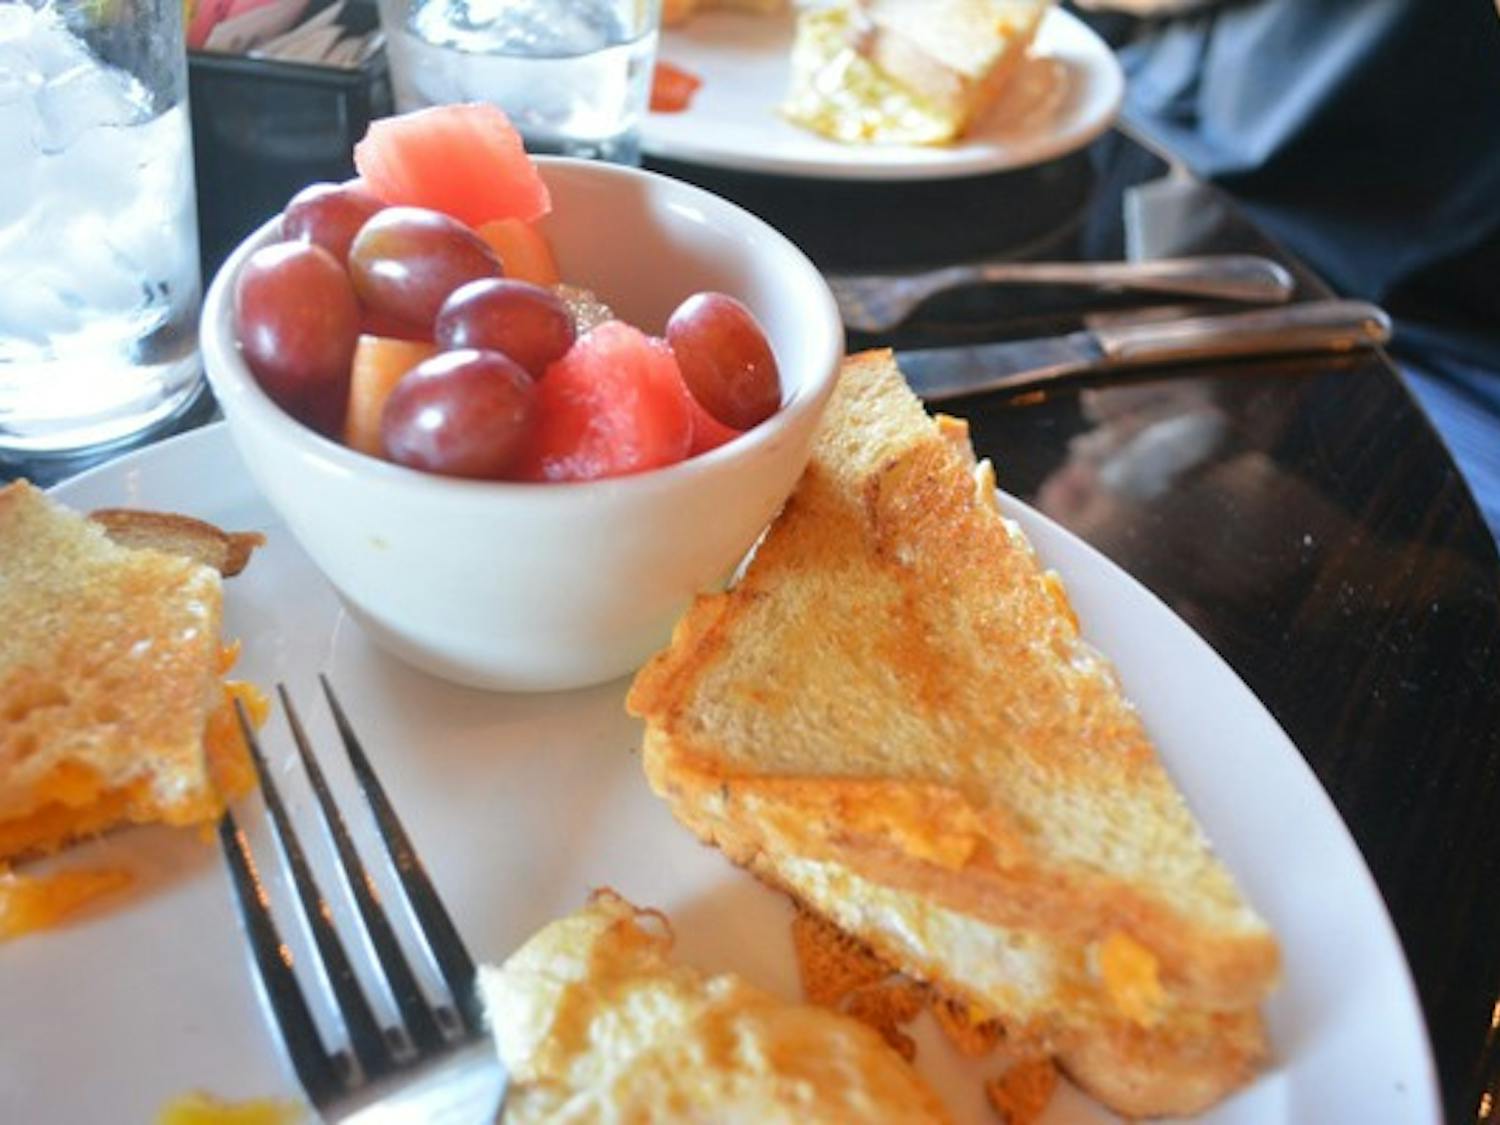 An egg and cheese sandwich accompanied with a fruit cup at Orange Table Tempe is one of many traditional breakfast selections available. (Photo by Aubrey Rumore)